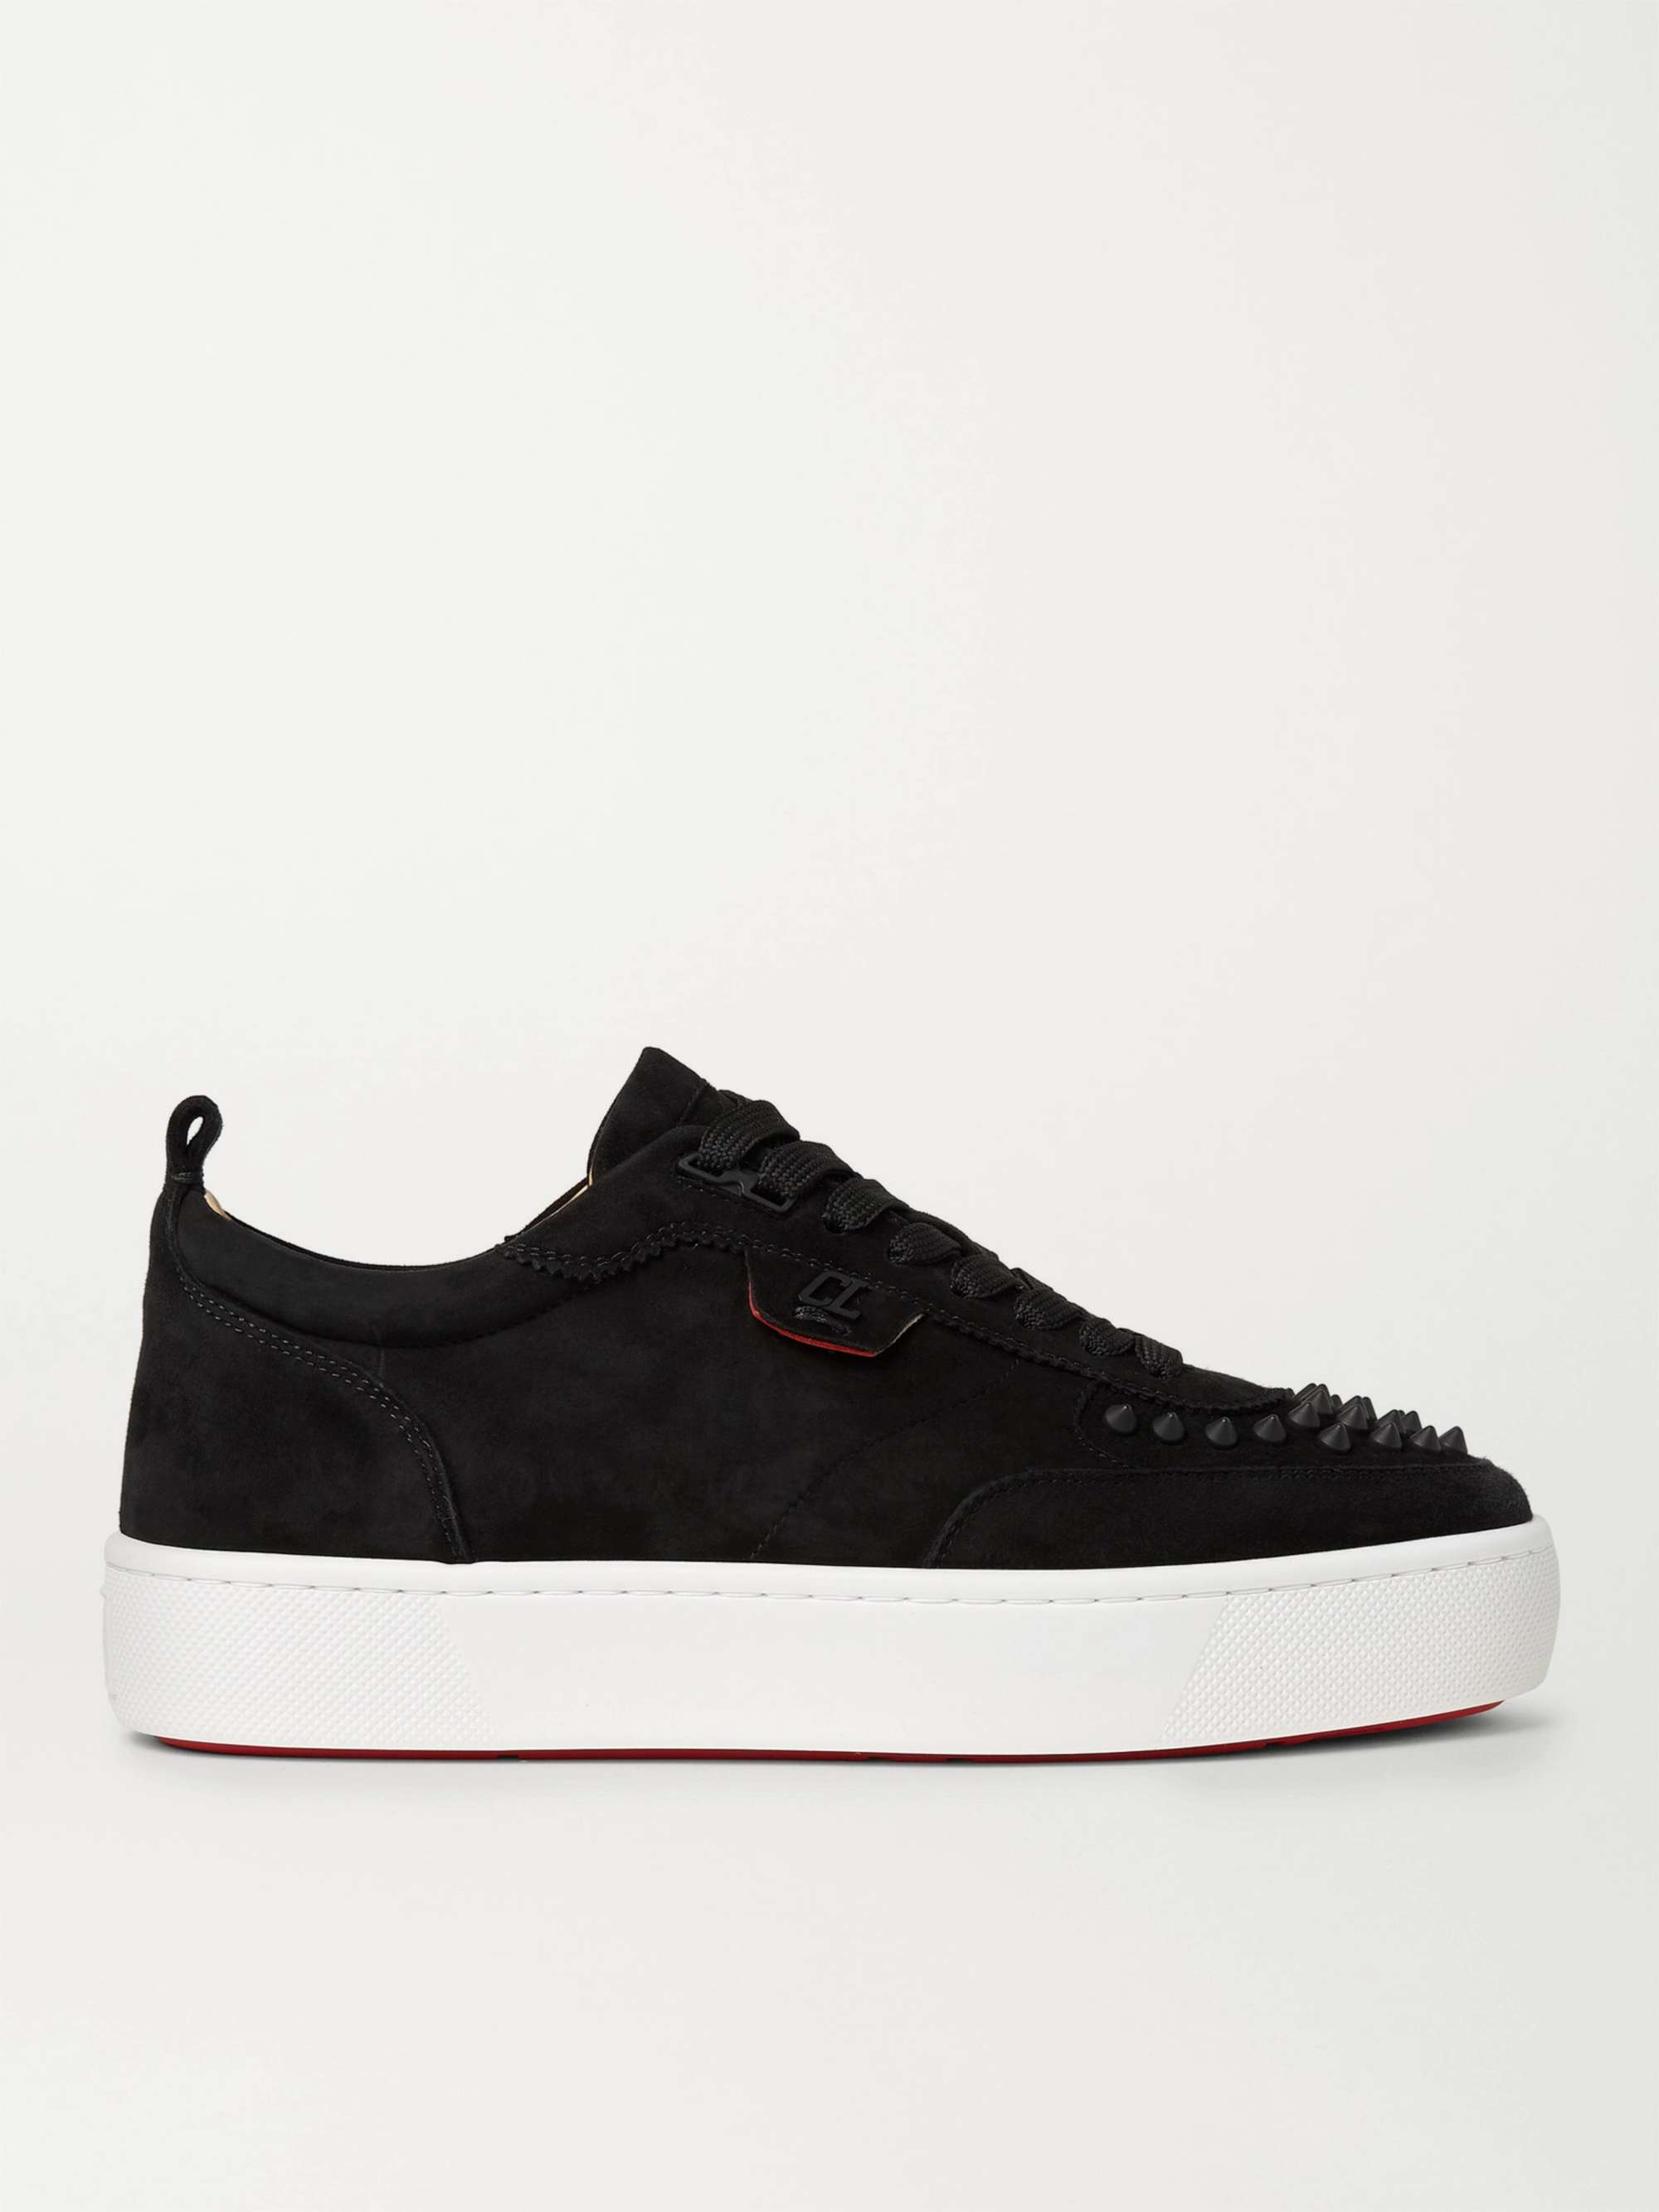 CHRISTIAN LOUBOUTIN Happyrui Spiked Suede Sneakers | MR PORTER